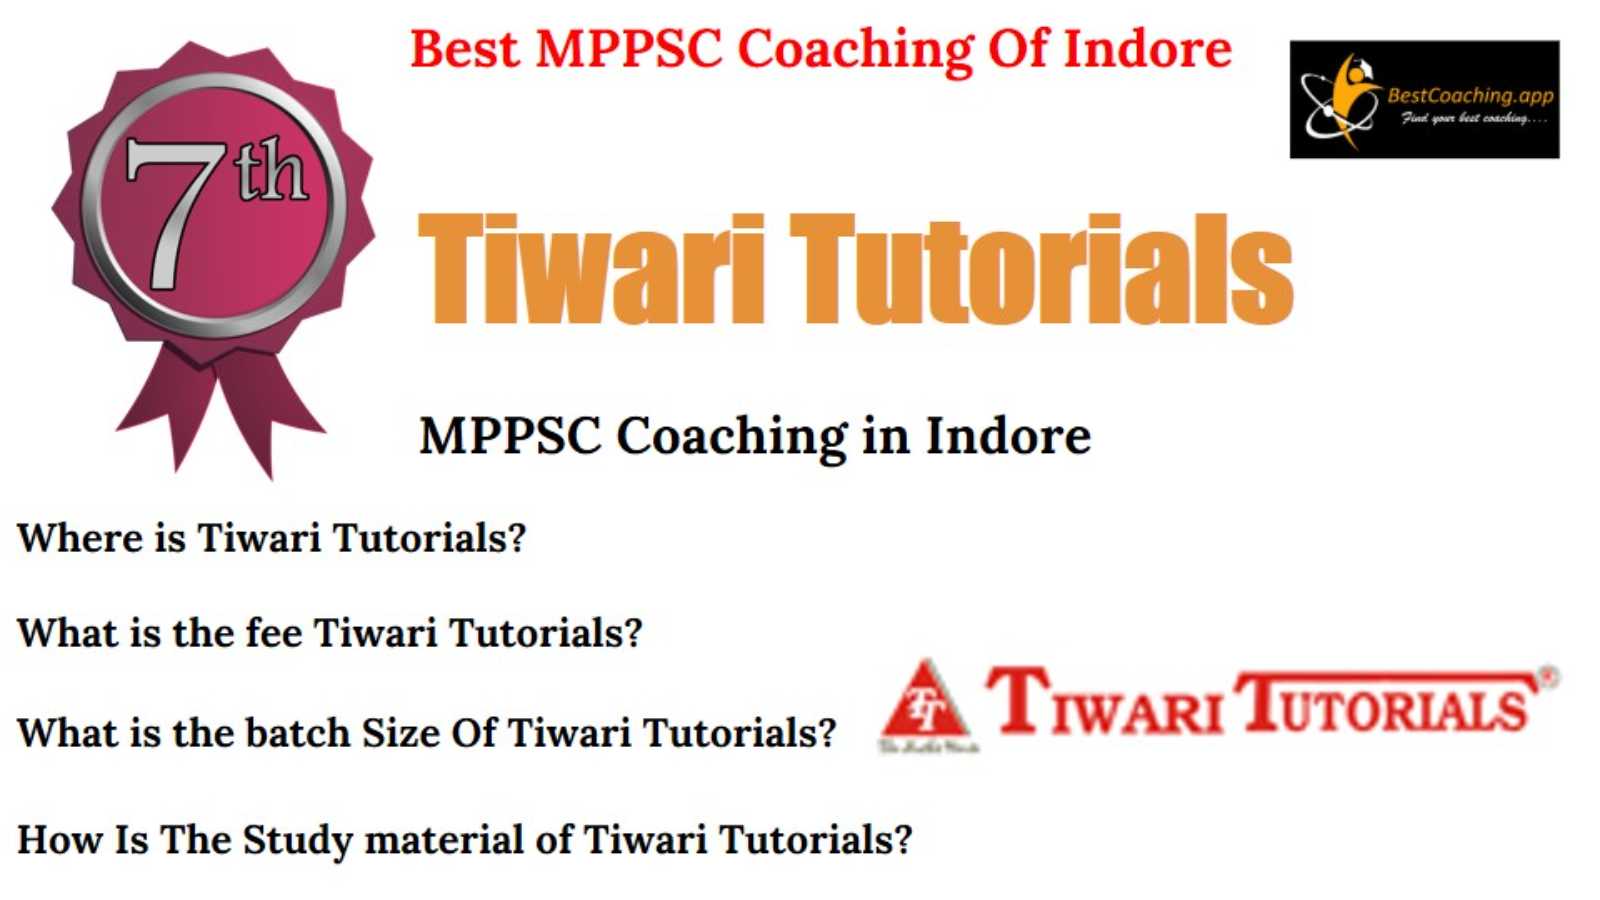 MPPSC Coaching Classes In Indore